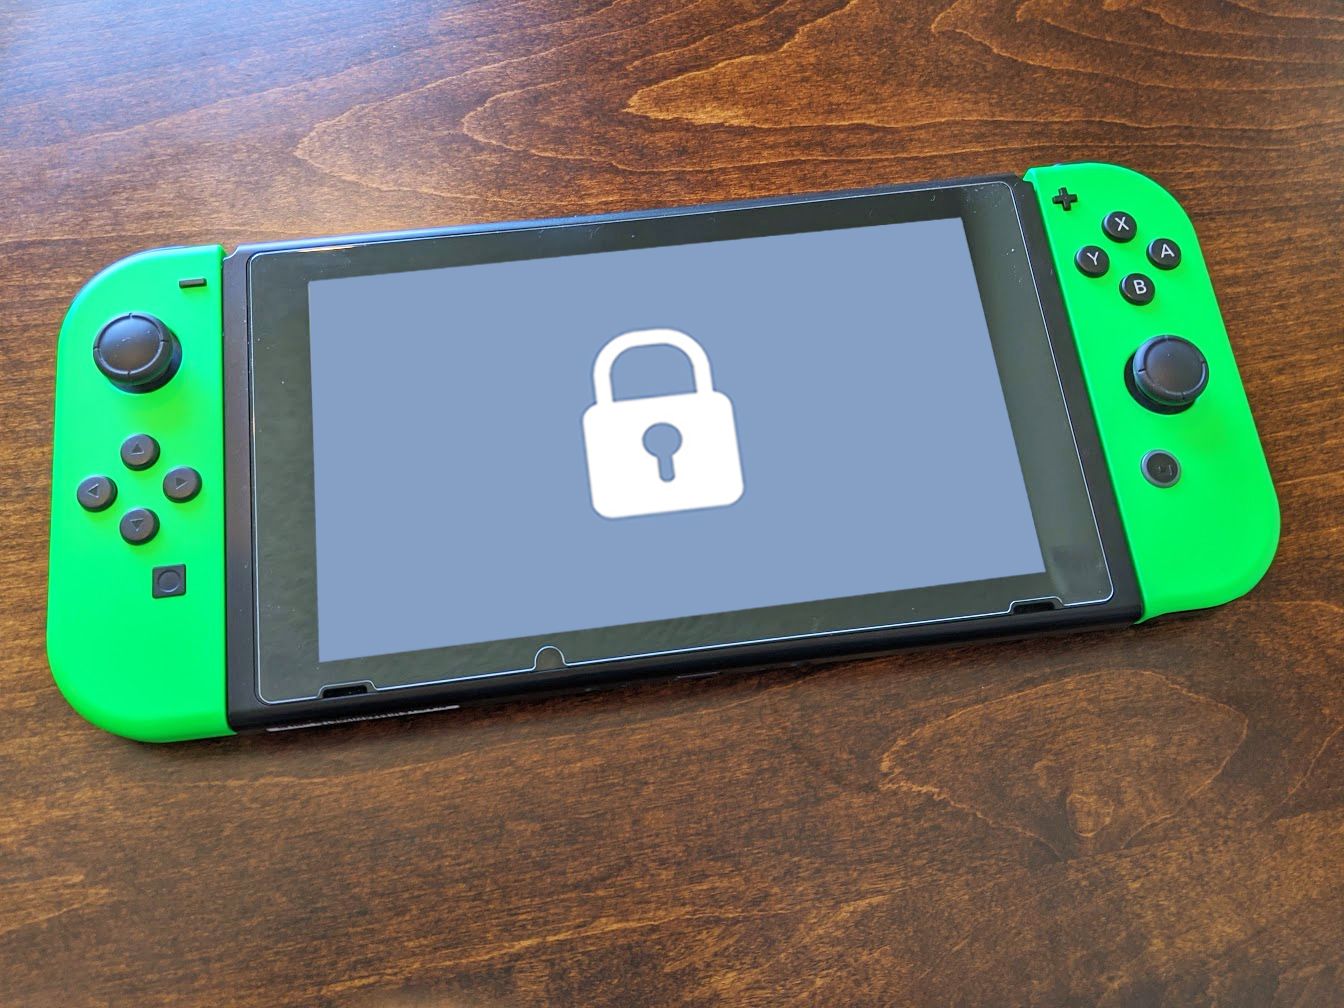 https://www.imore.com/sites/imore.com/files/styles/w1600h900crop_wm_brw/public/field/image/2020/04/how-to-two-factor-authentication-nintendo-switch-hero.jpg?itok=4e1lm36j